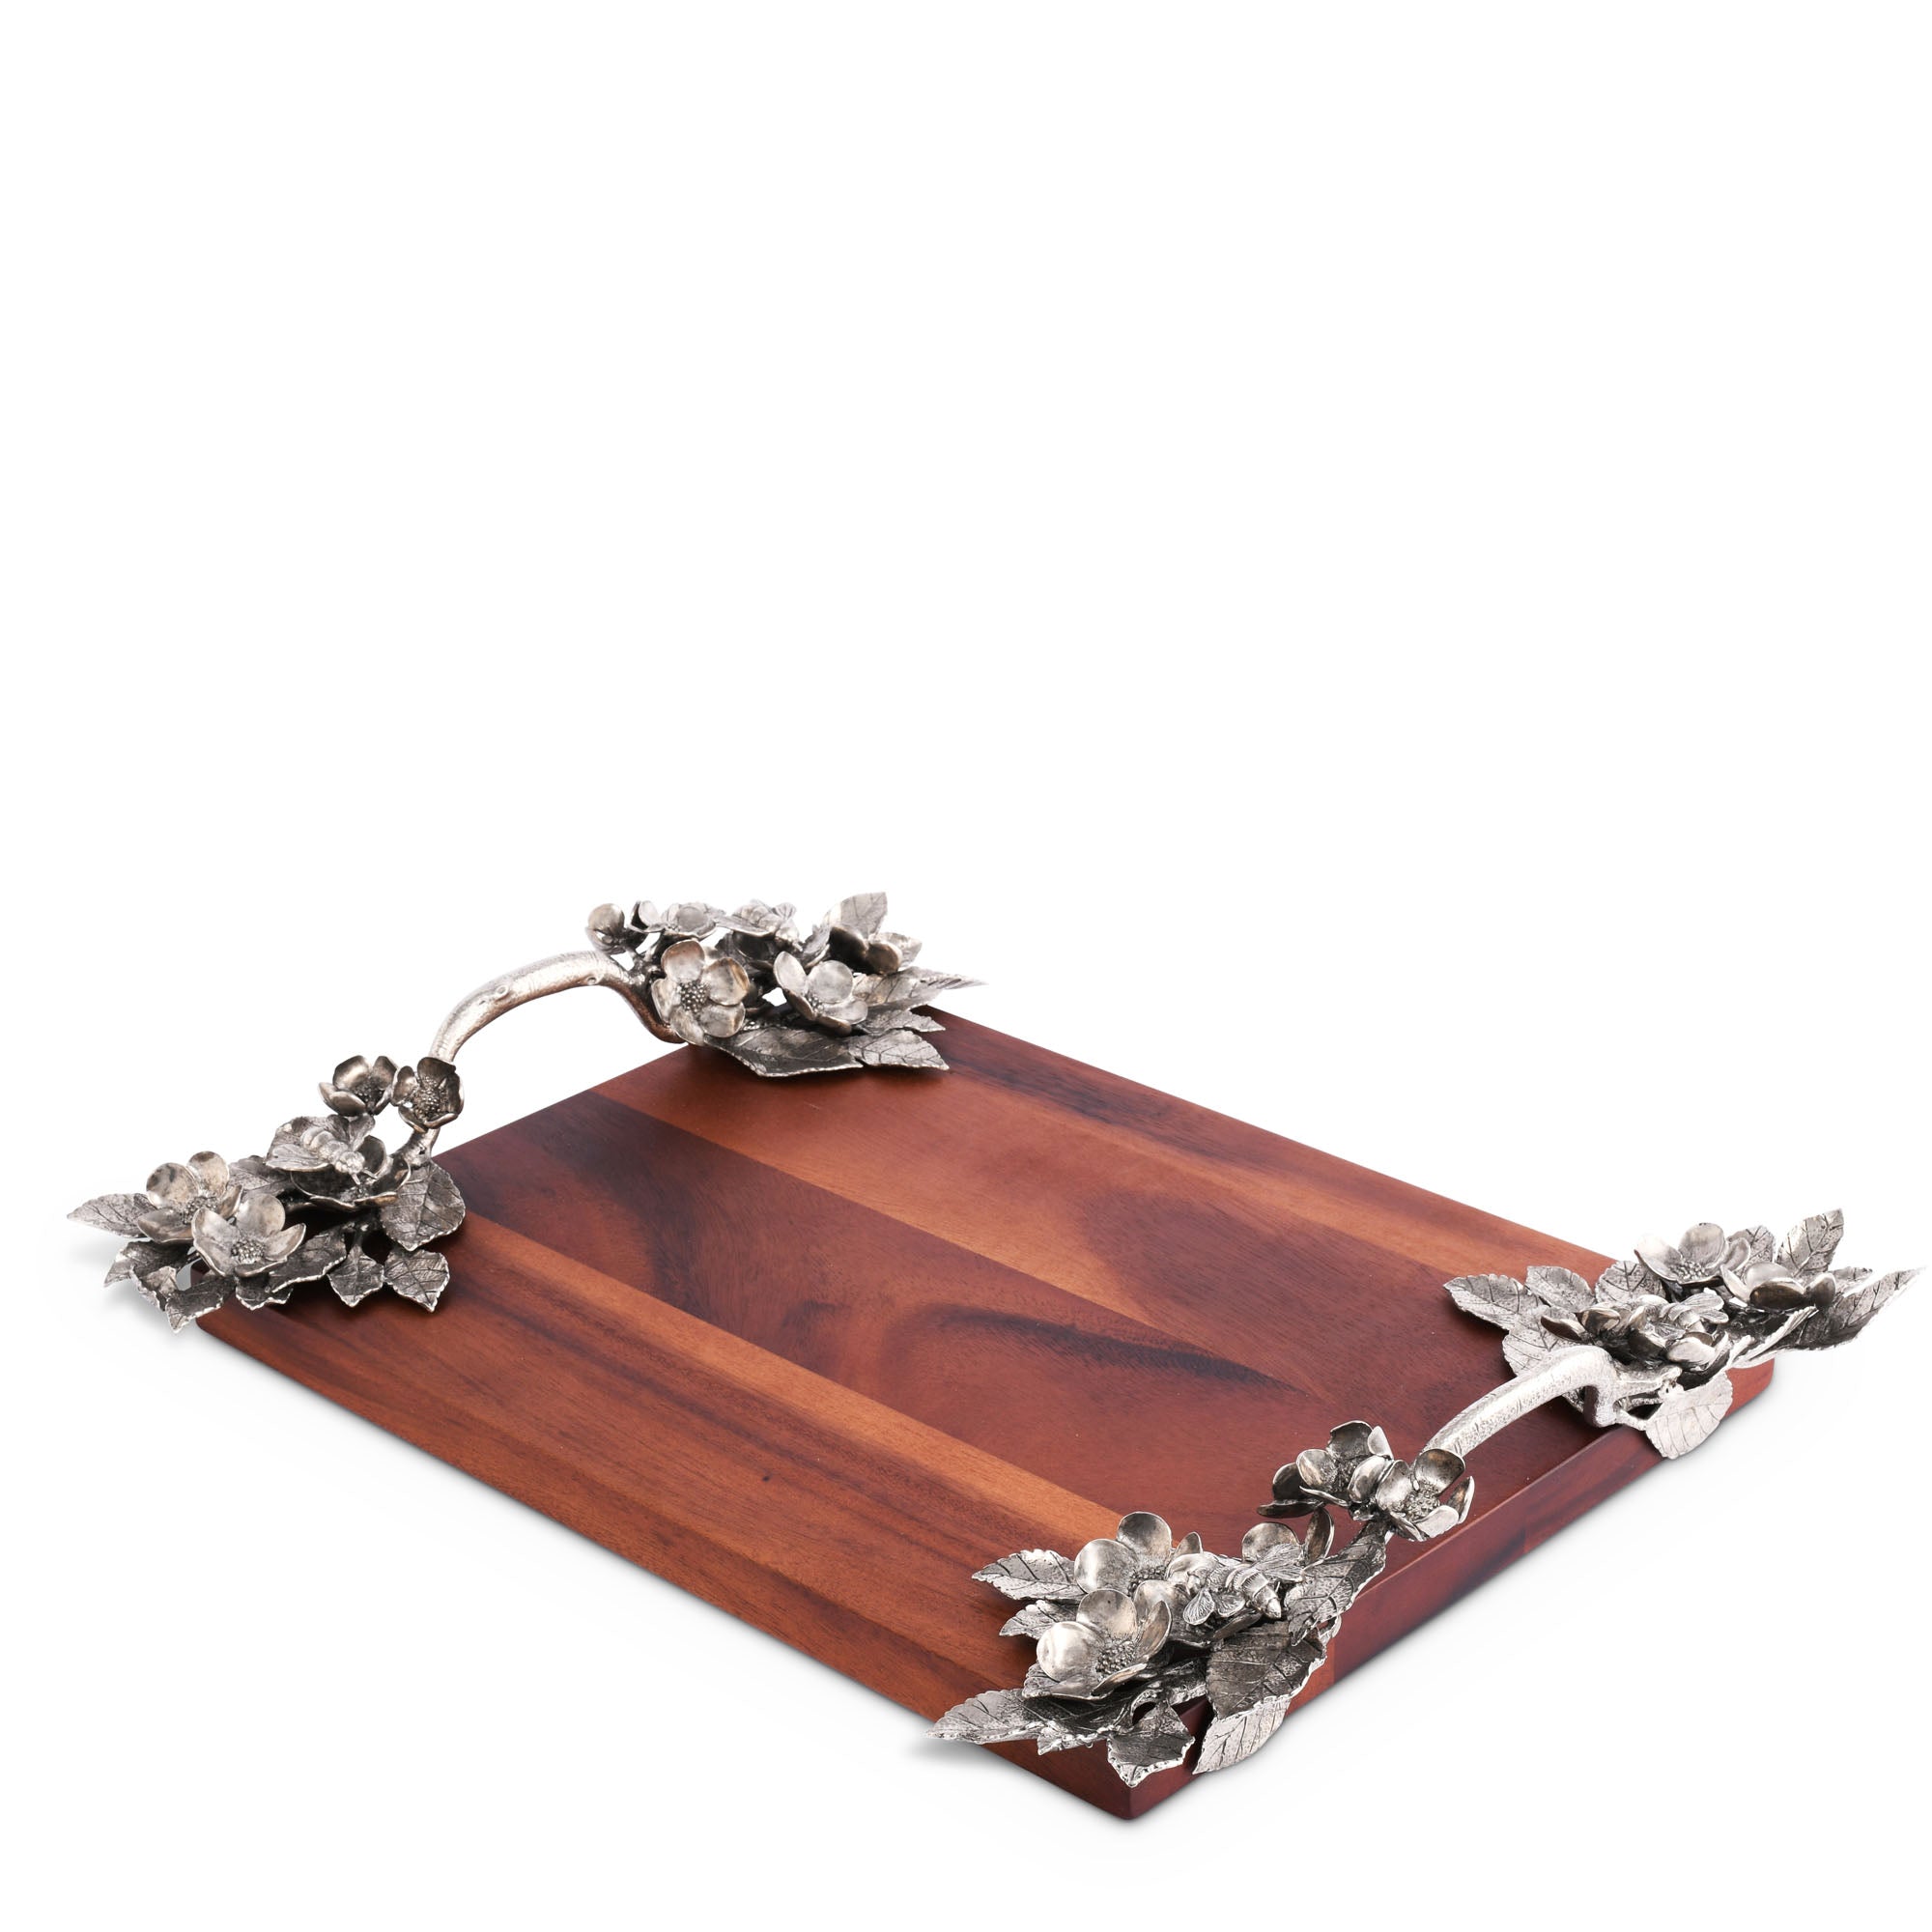 Vagabond House Bee and Flower Serving Tray Product Image